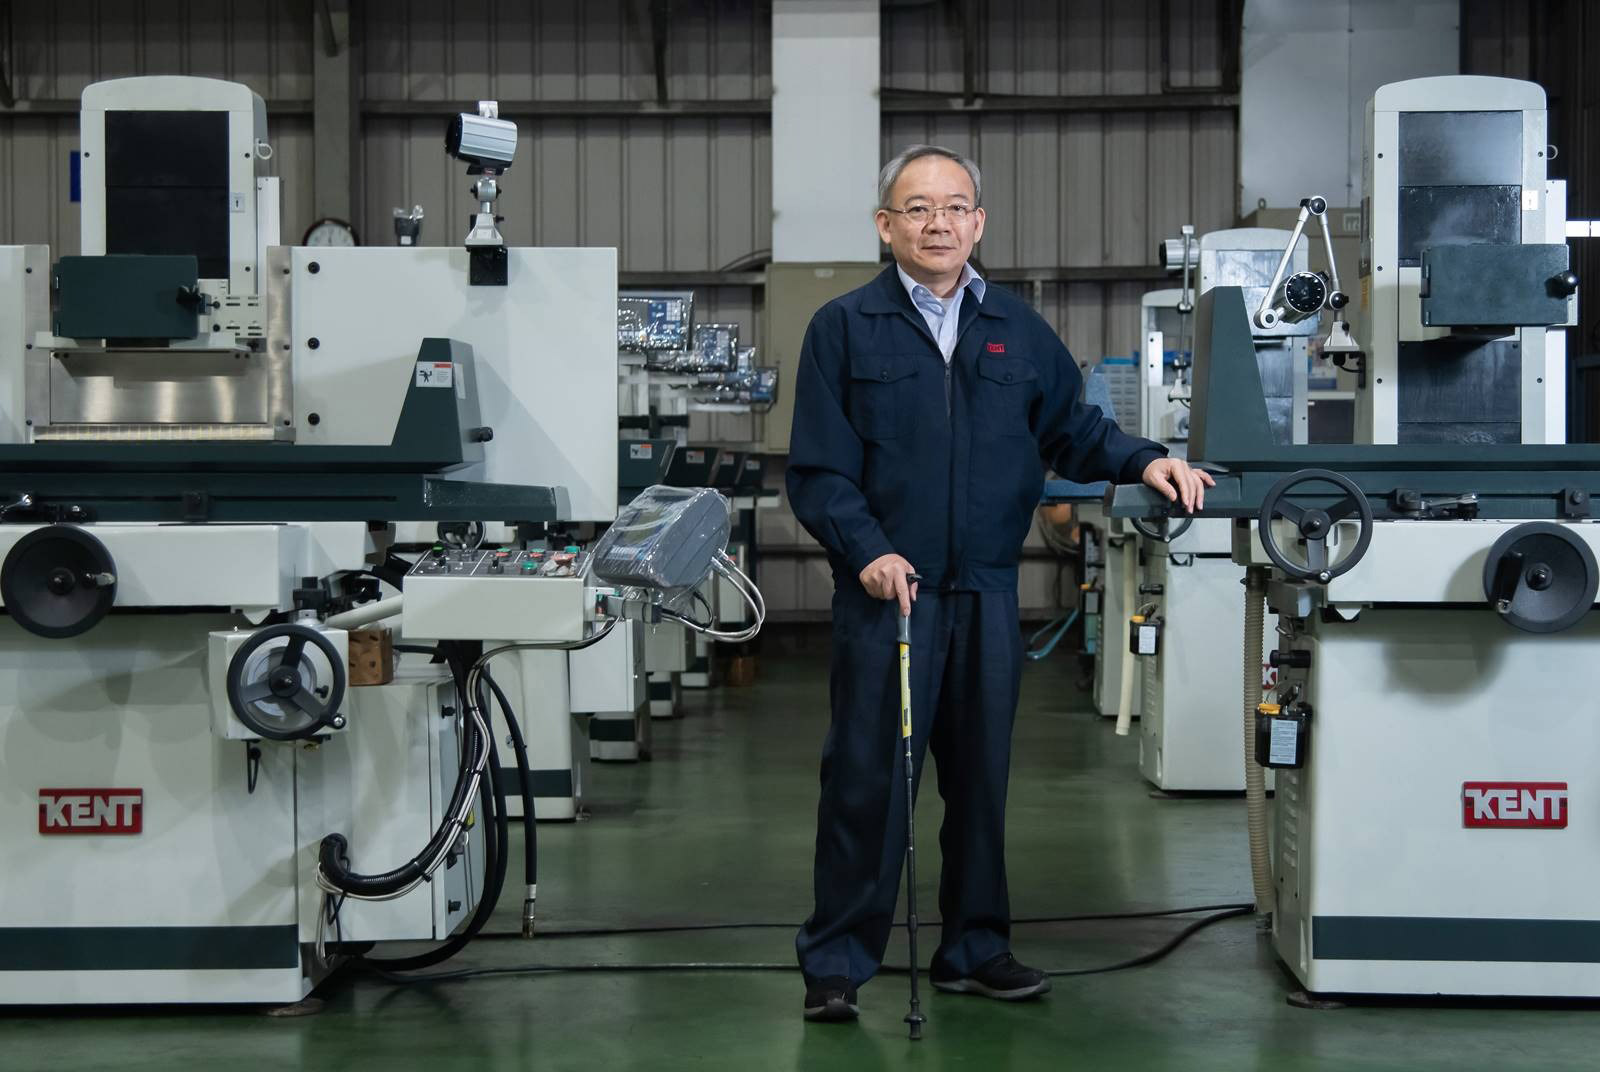 From iPhones to Mercedes: How Taiwan’s Kent became top grinder maker